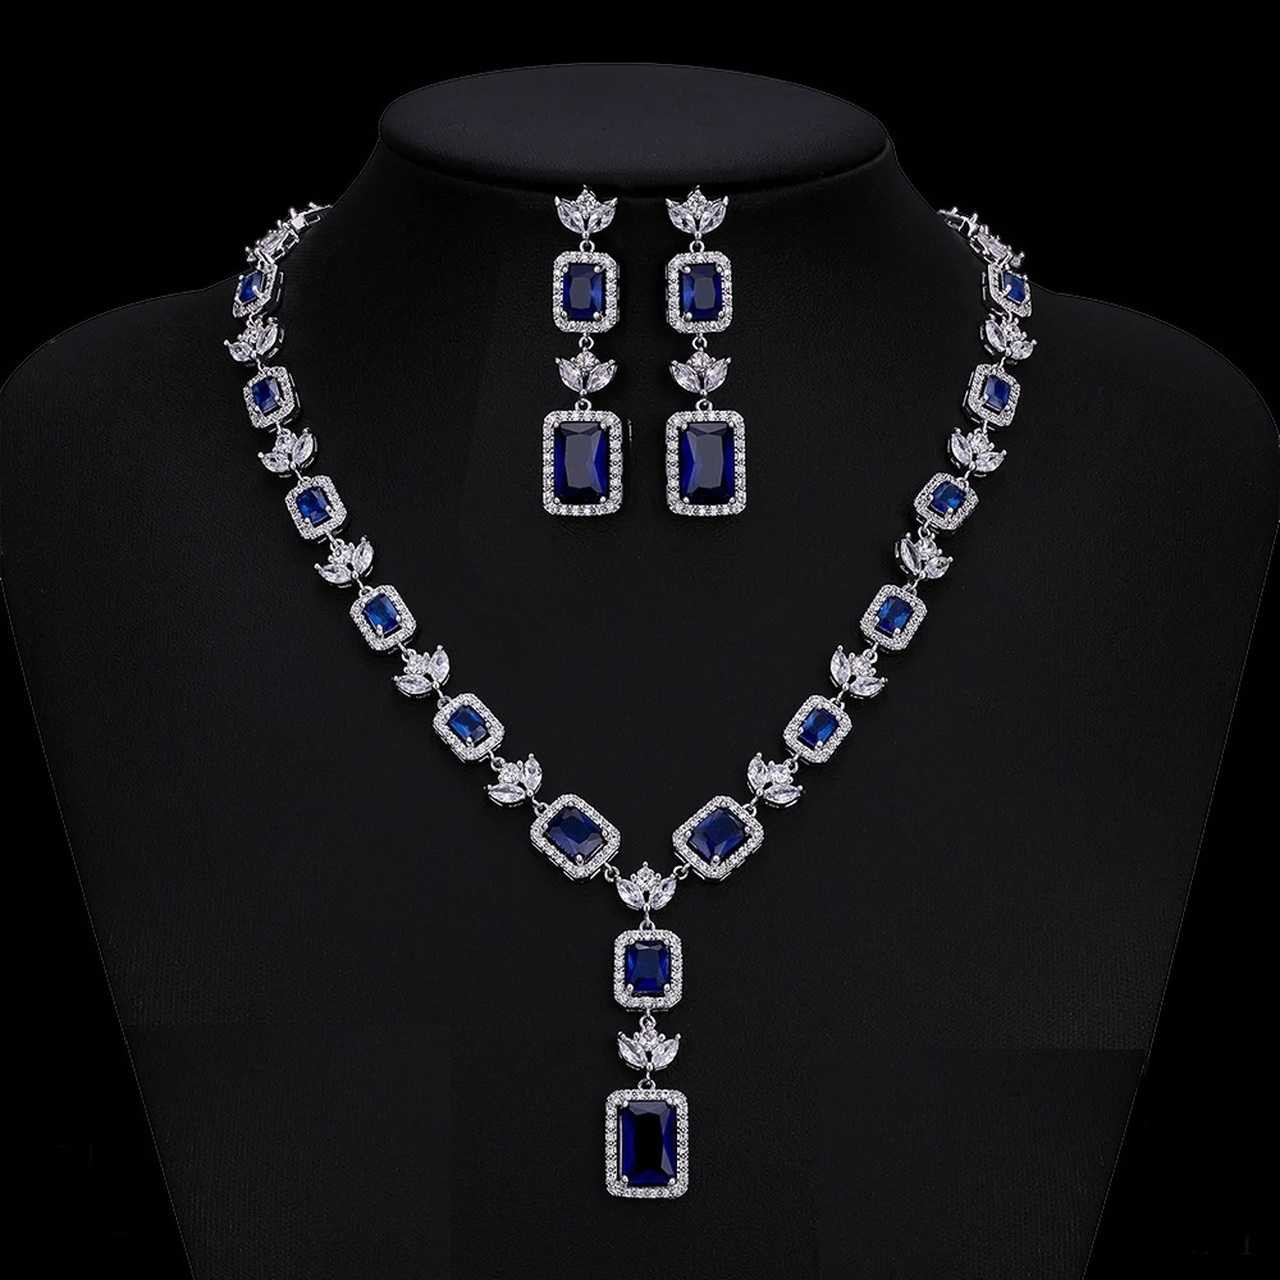 Oval Created Blue Sapphire & White Topaz Necklace & Stud Earrings Set in  Silver | eBay